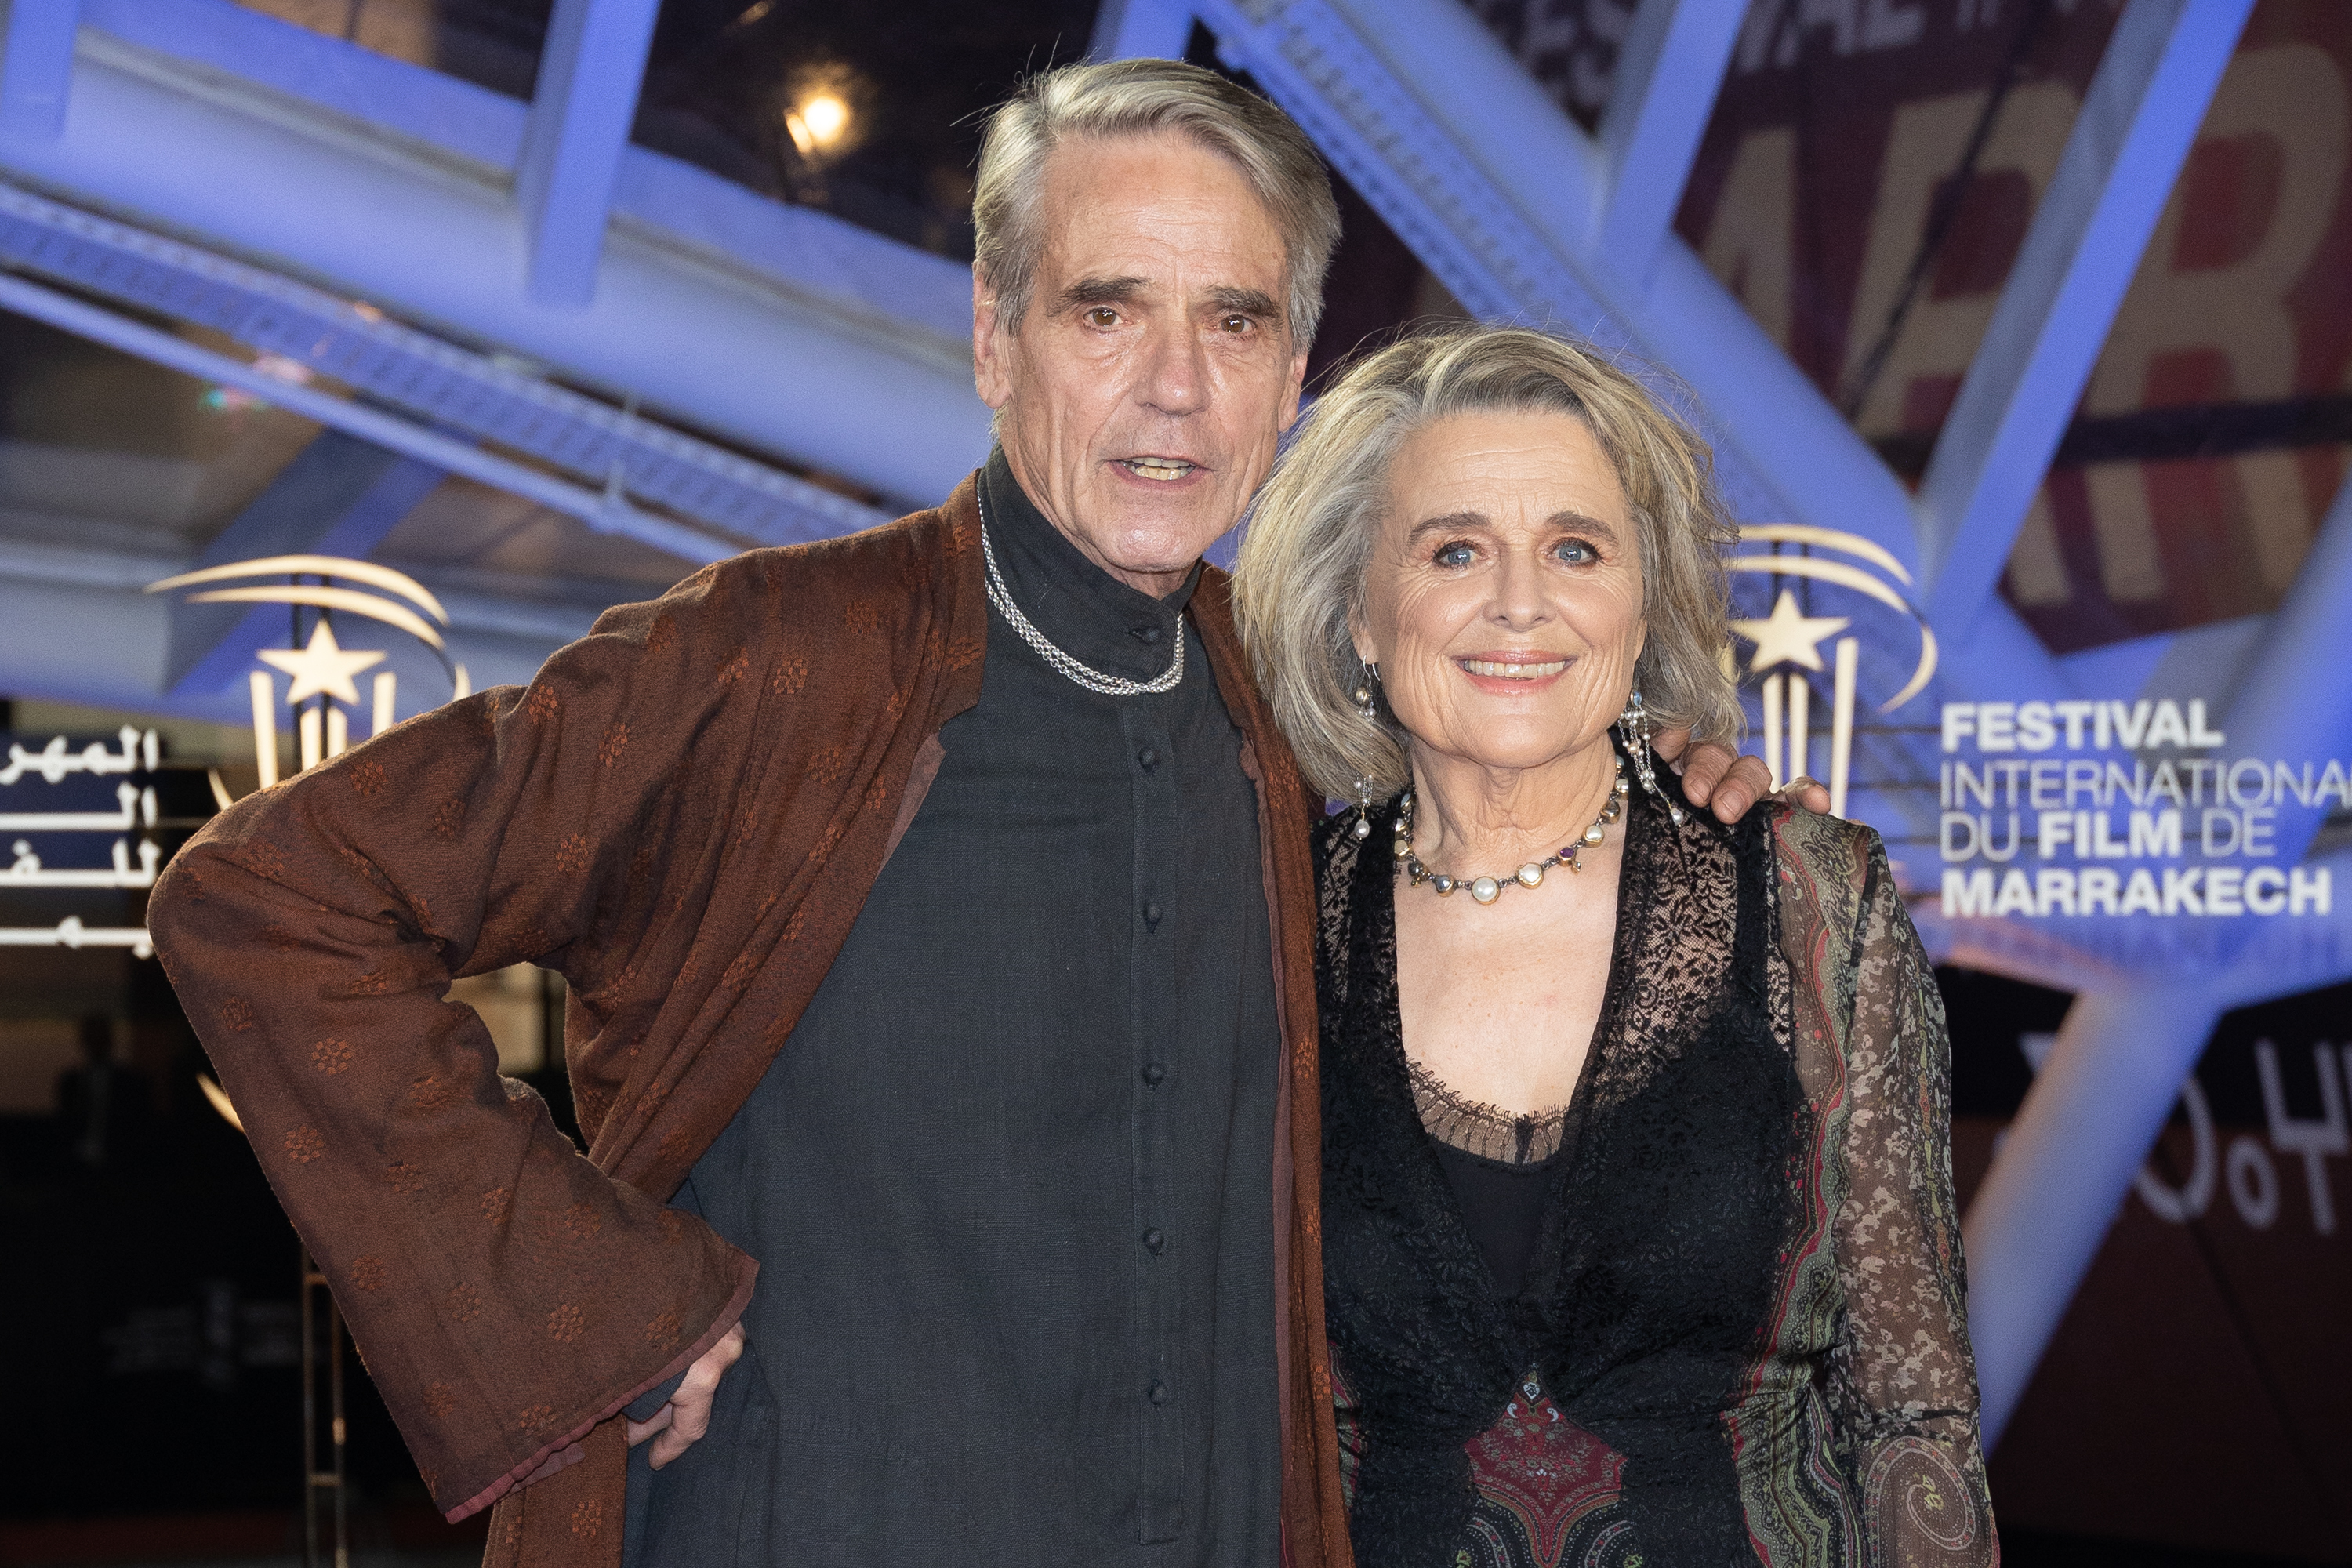 Jeremy Irons and Sinead Cusack on November 17, 2022, in Marrakech, Morocco. | Source: Getty Images